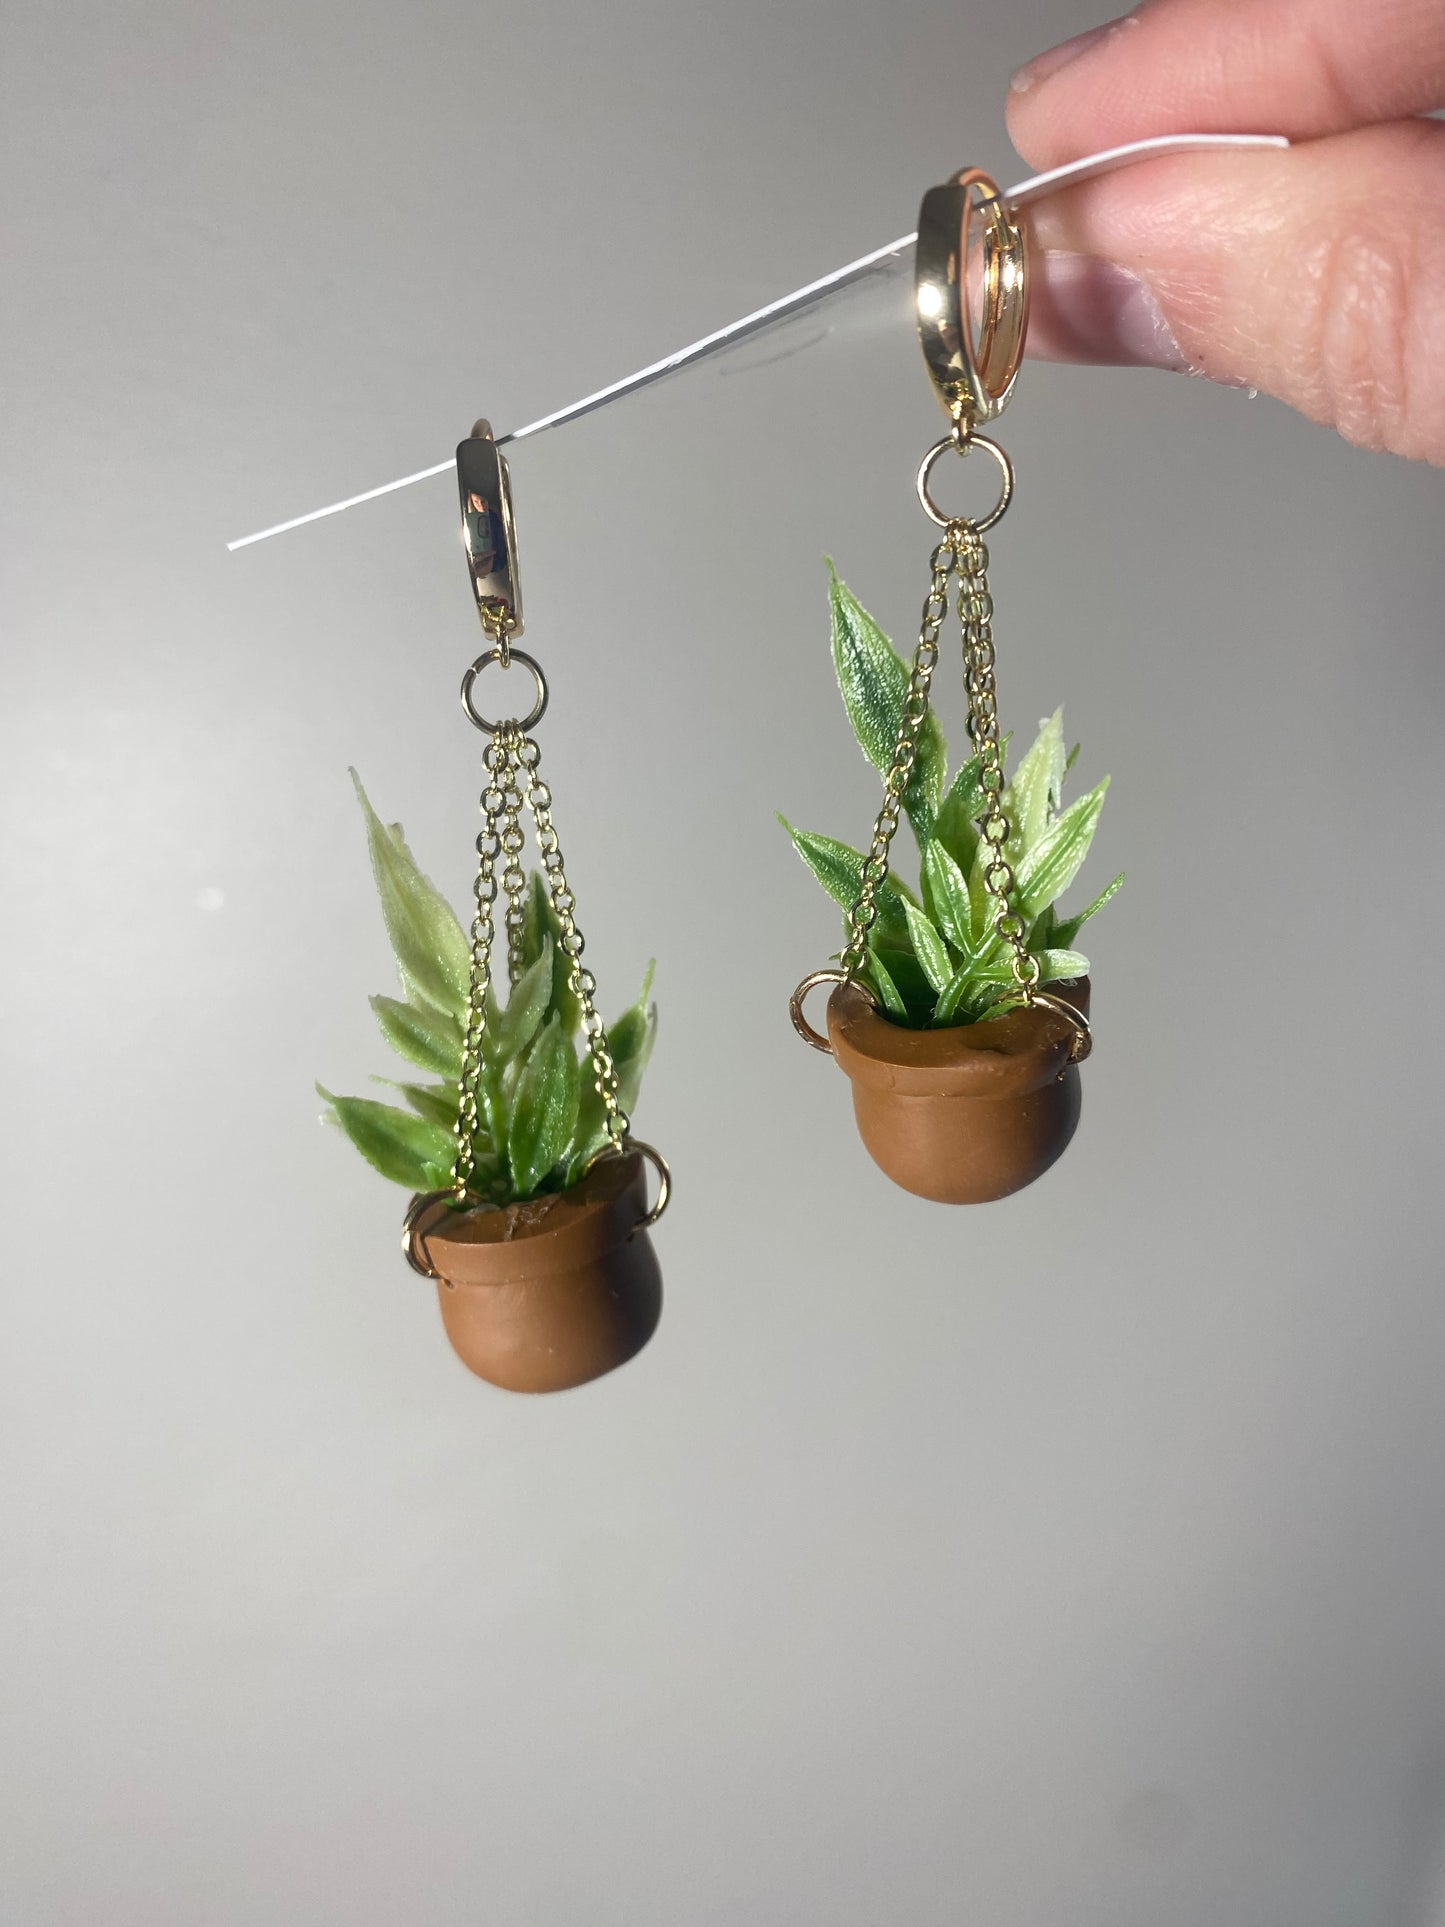 Hanging Plant Earring Kit | DIY Polymer Clay Earring